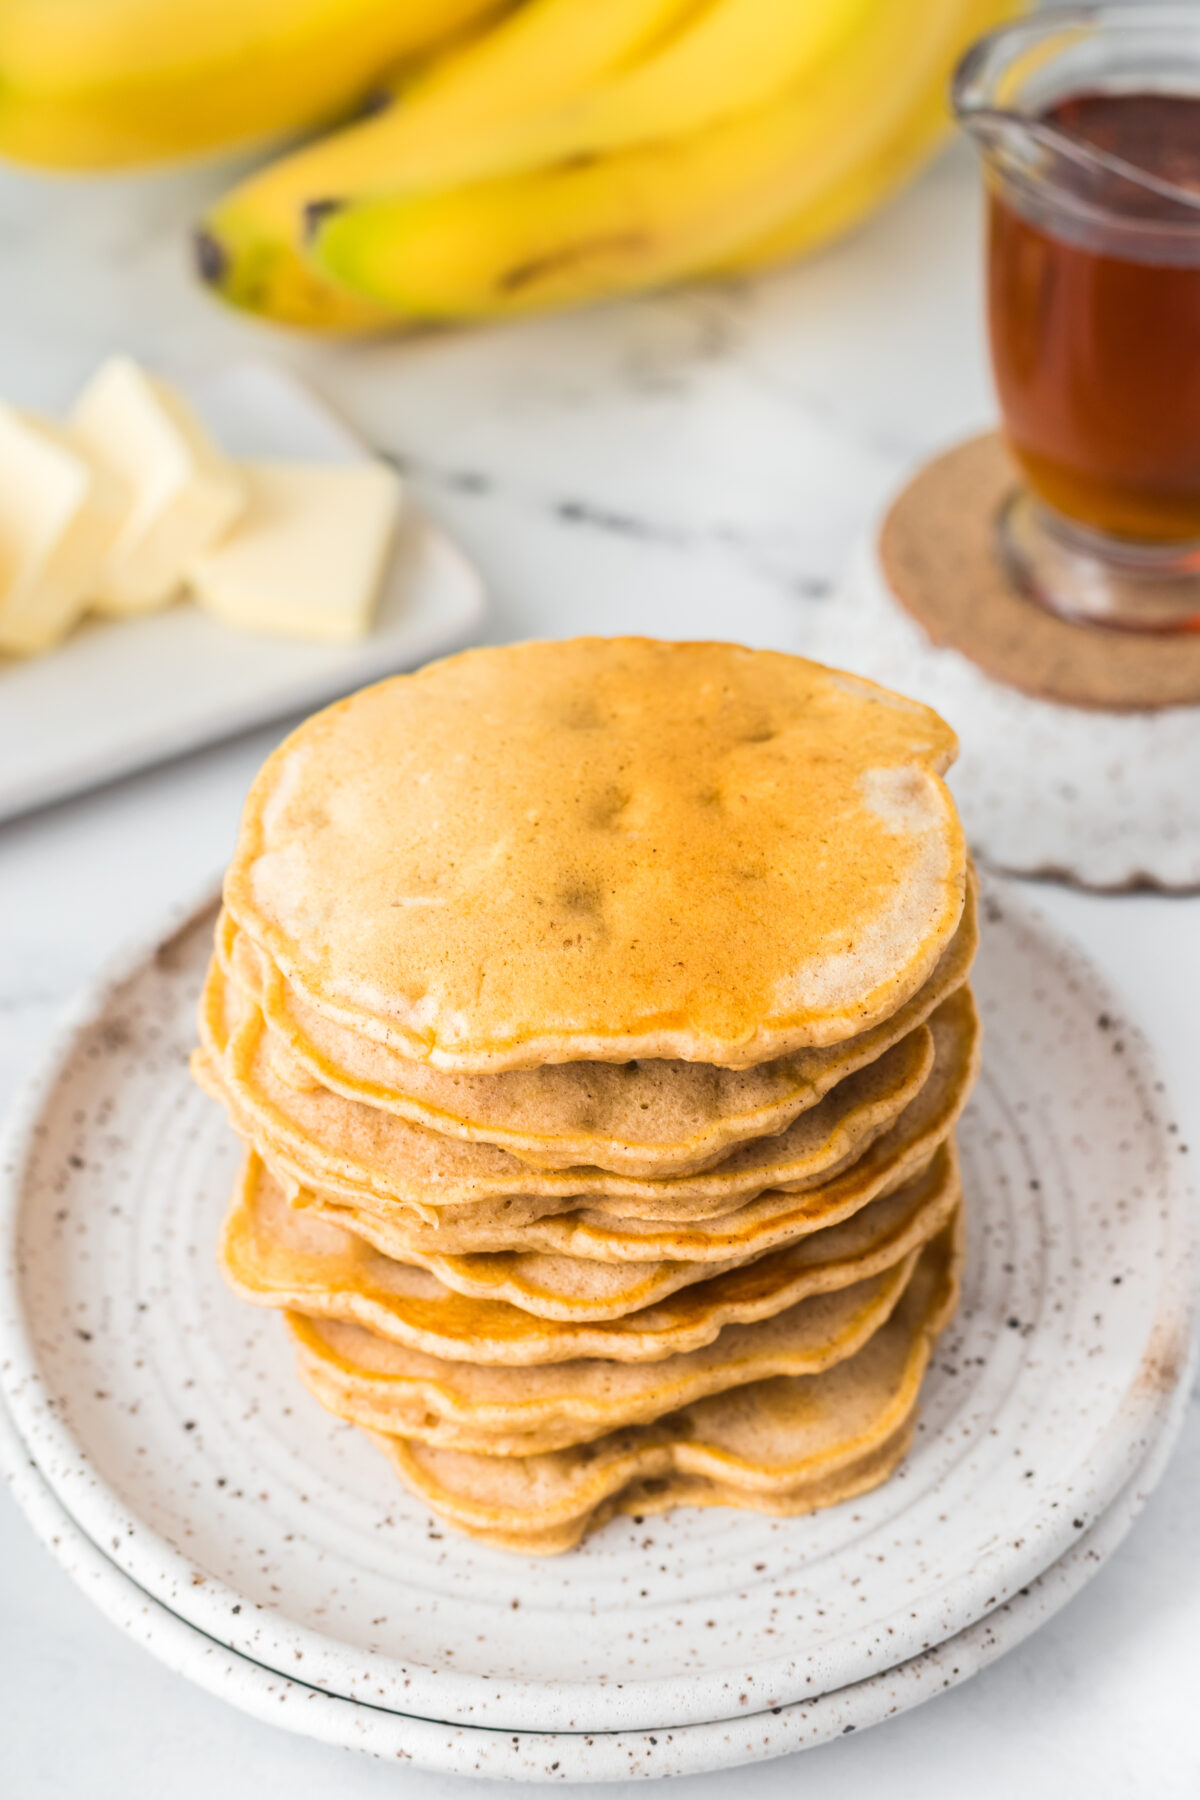 These delicious banana pancakes are perfect for a weekend breakfast or brunch. They're easy to make and only require a few simple ingredients.